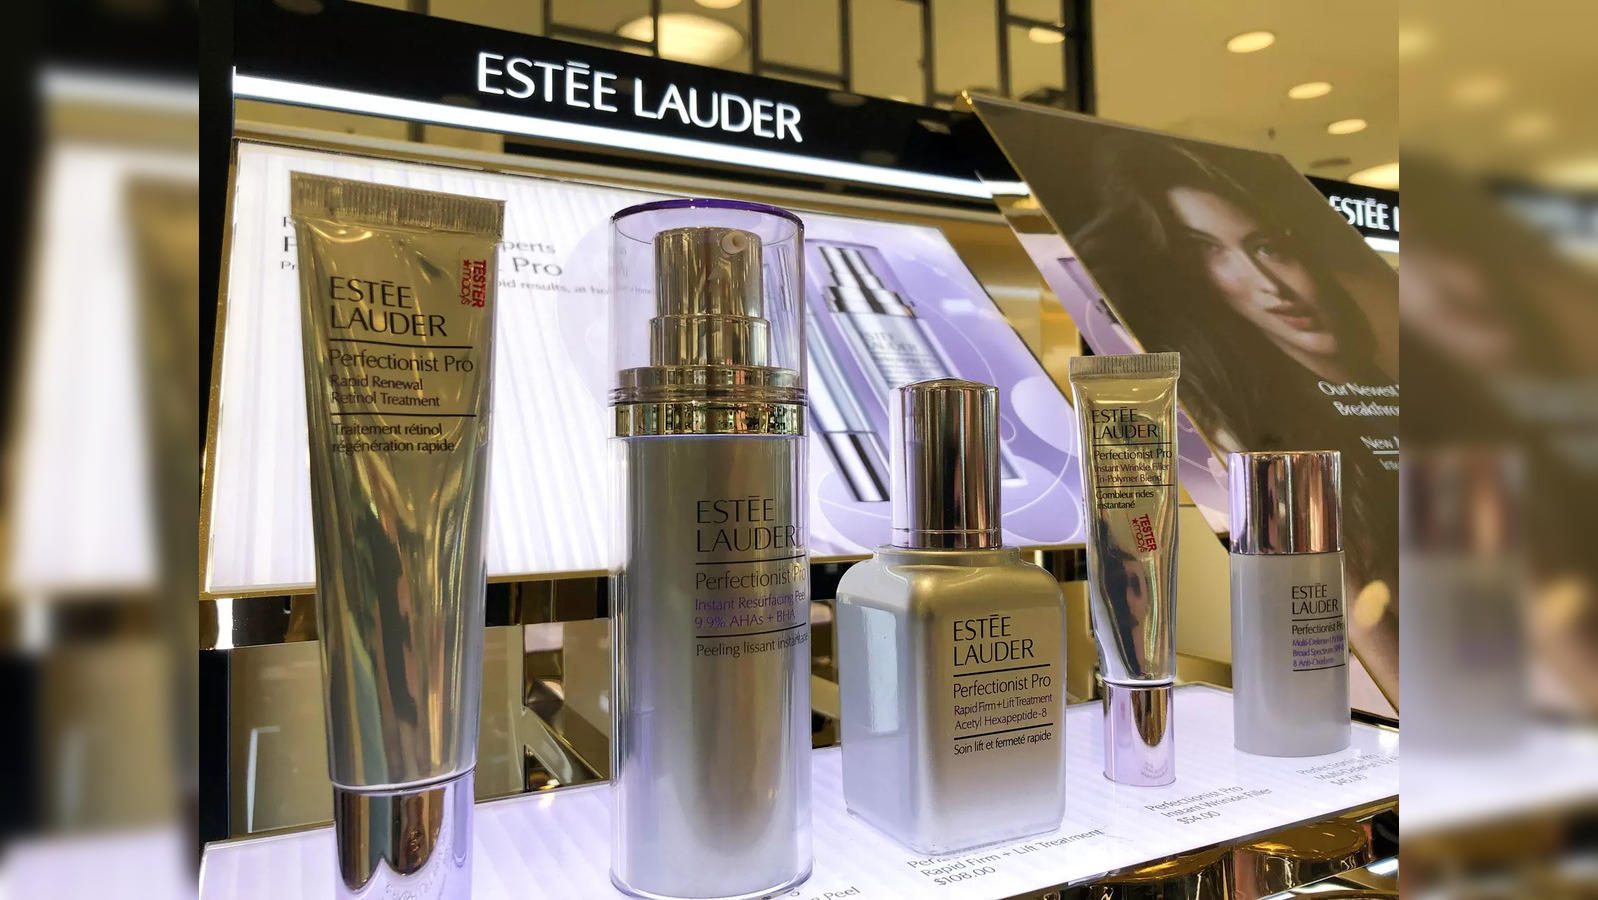 What To Expect From Estee Lauder's Q2